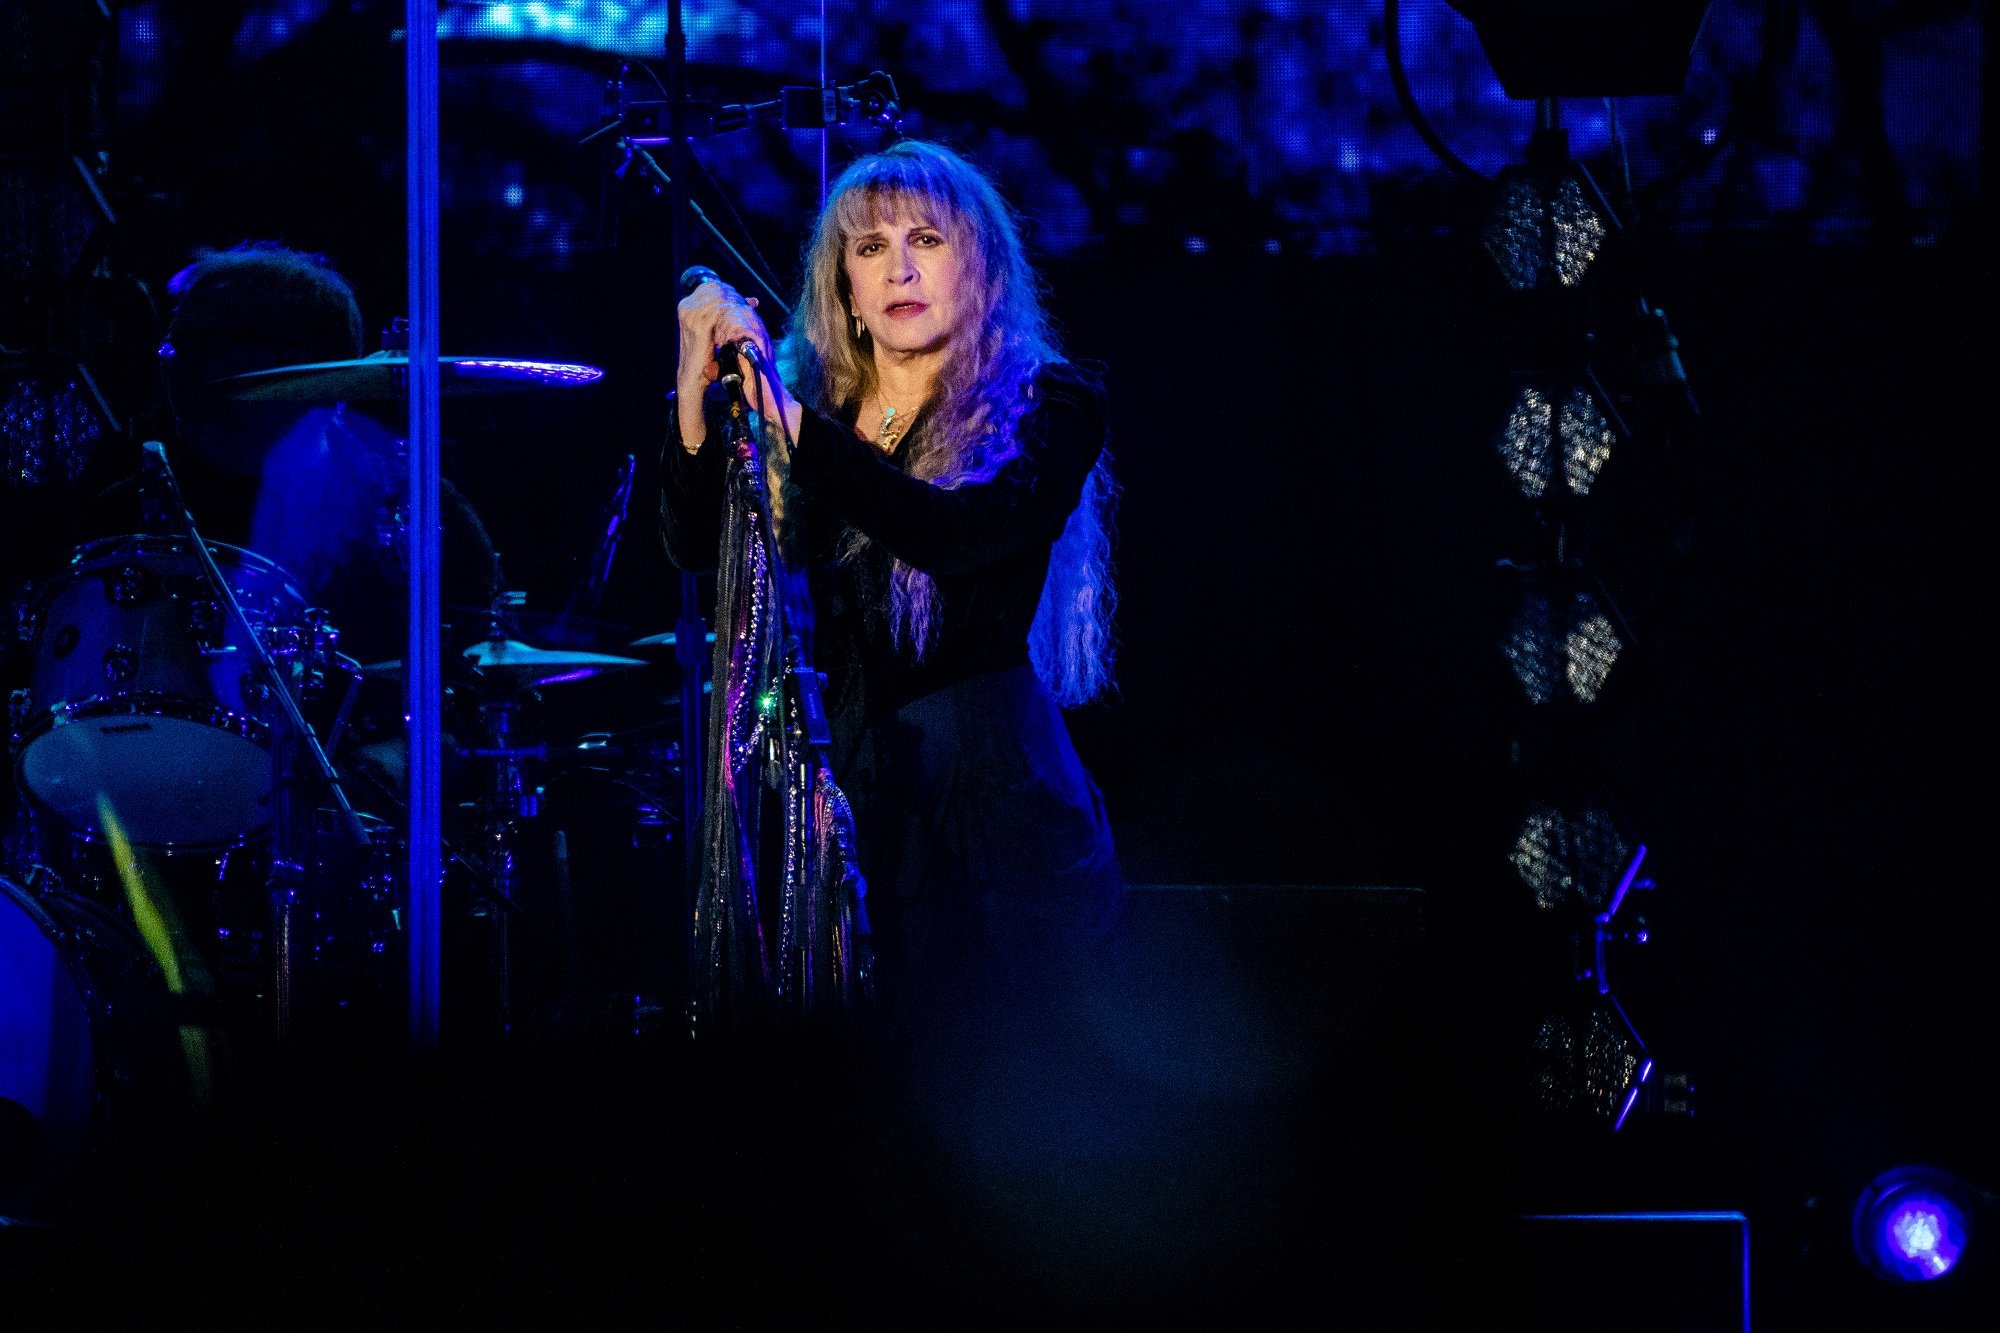 Stevie Nicks stands on stage and holds a microphone stand